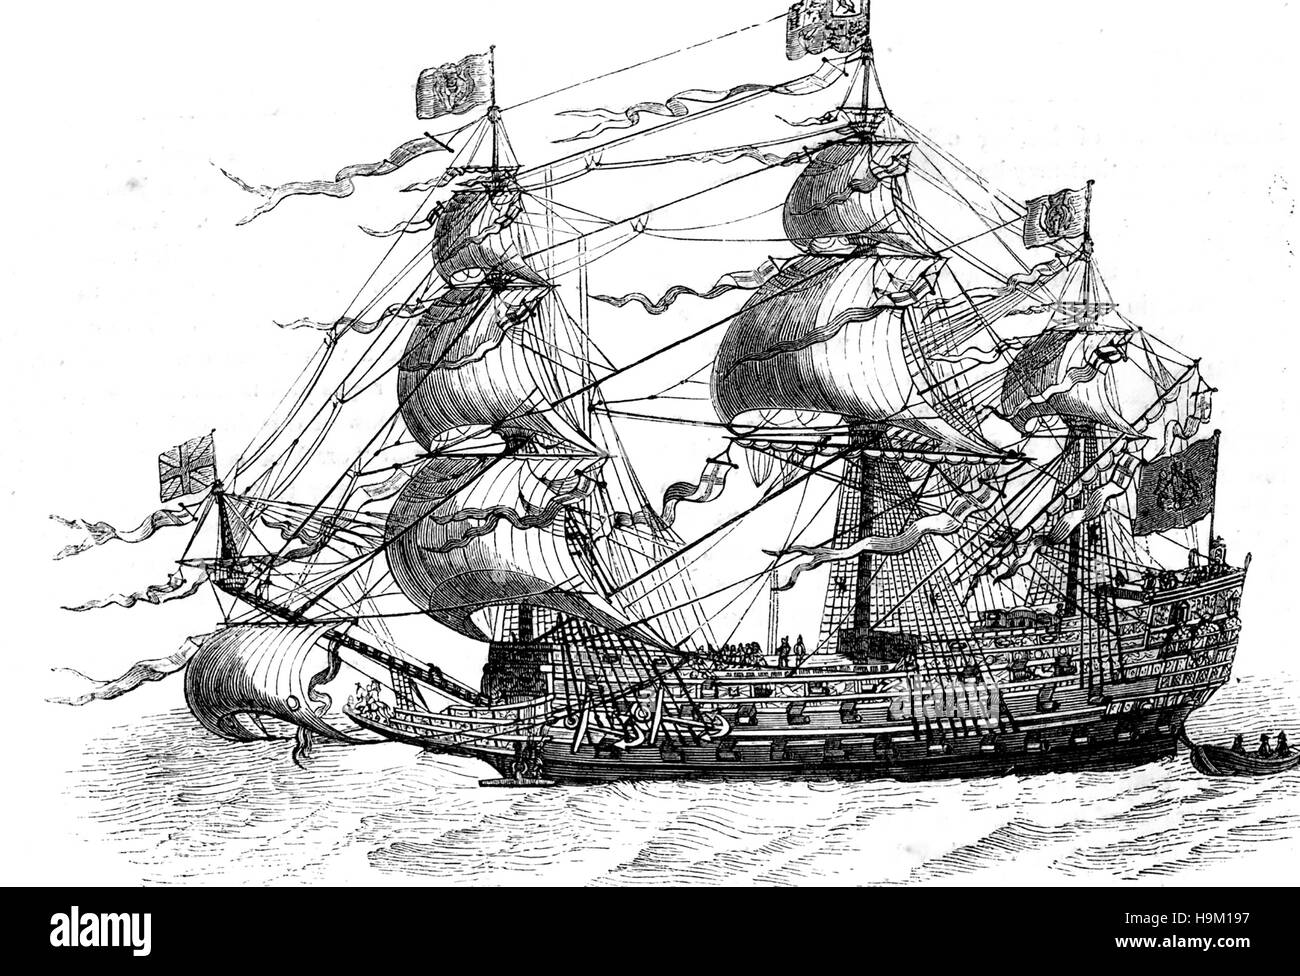 HMS SOVEREIGN OF THE SEAS   British Navy warship launched in 1637 Stock Photo